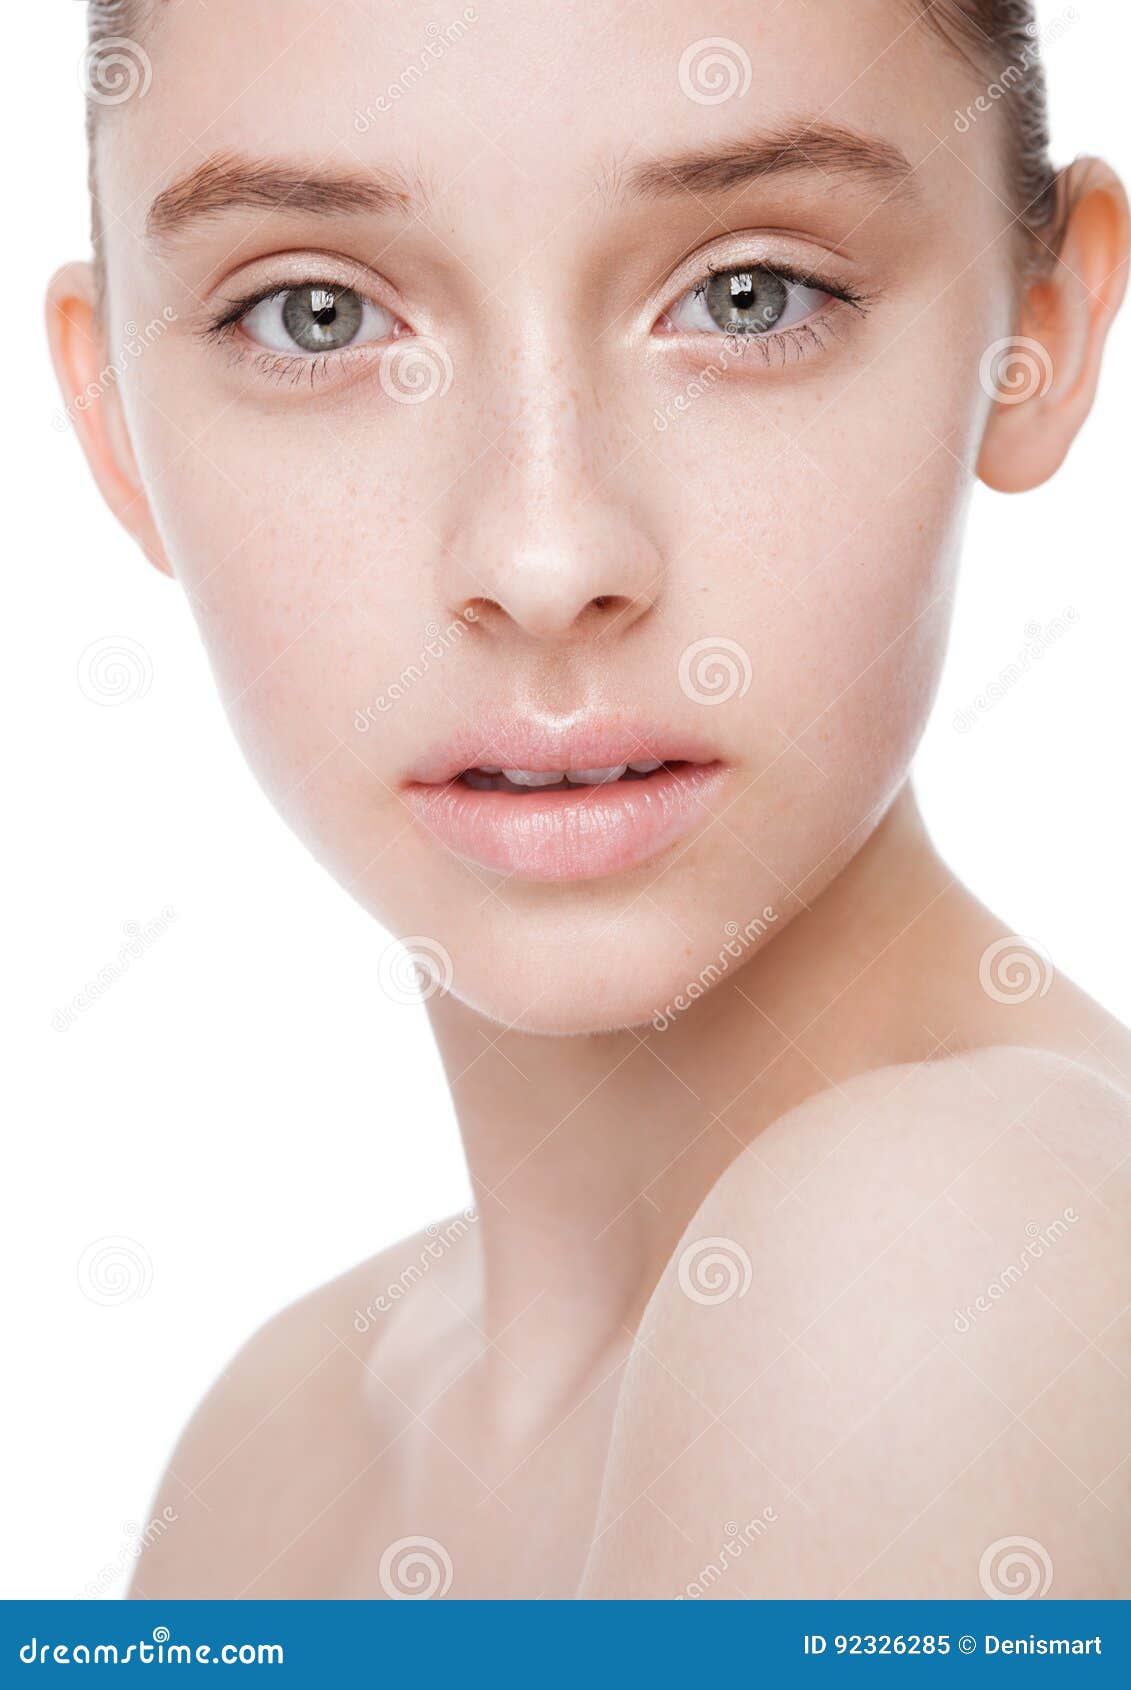 Beauty Fashion Model with Natural Makeup Skin Care Stock Image - Image ...